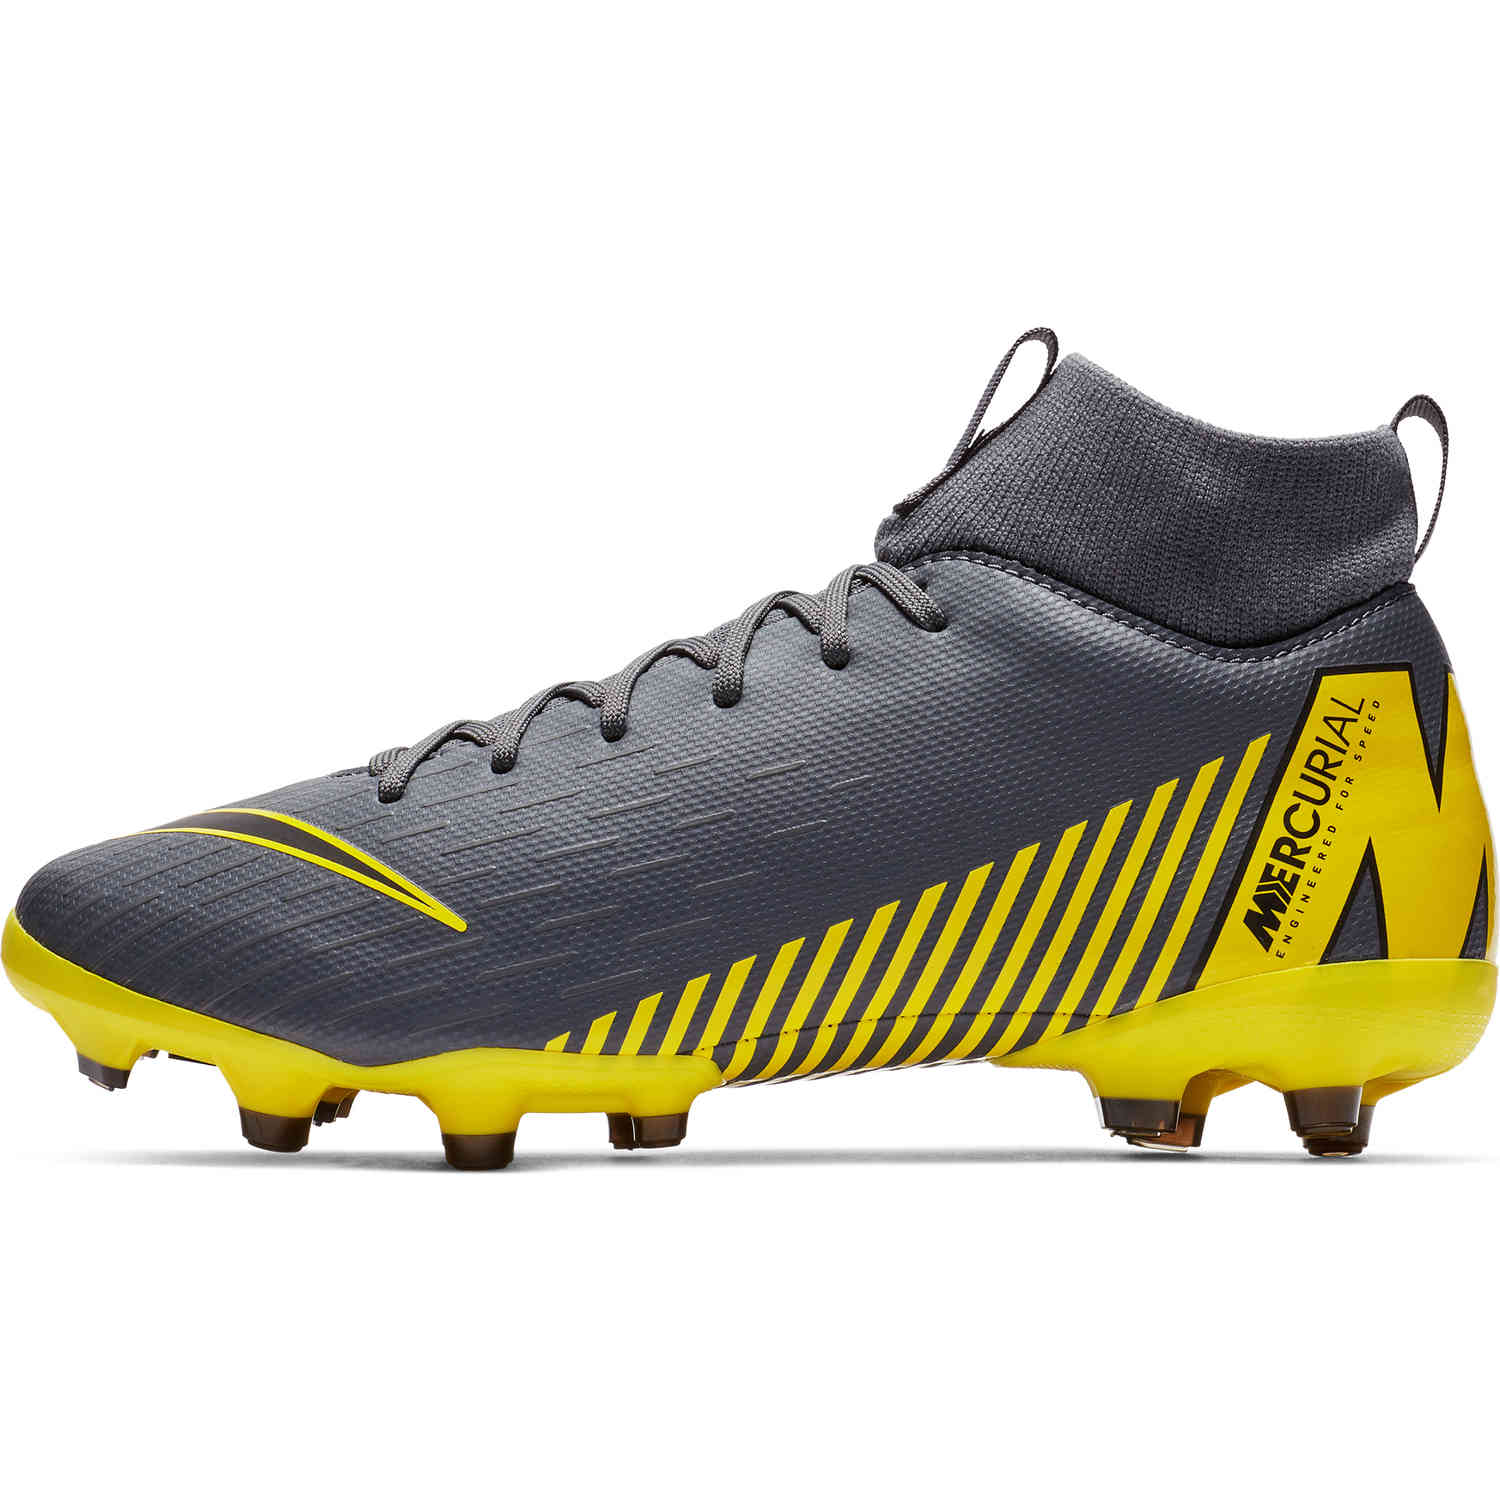 nike game over mercurial superfly academy df fg